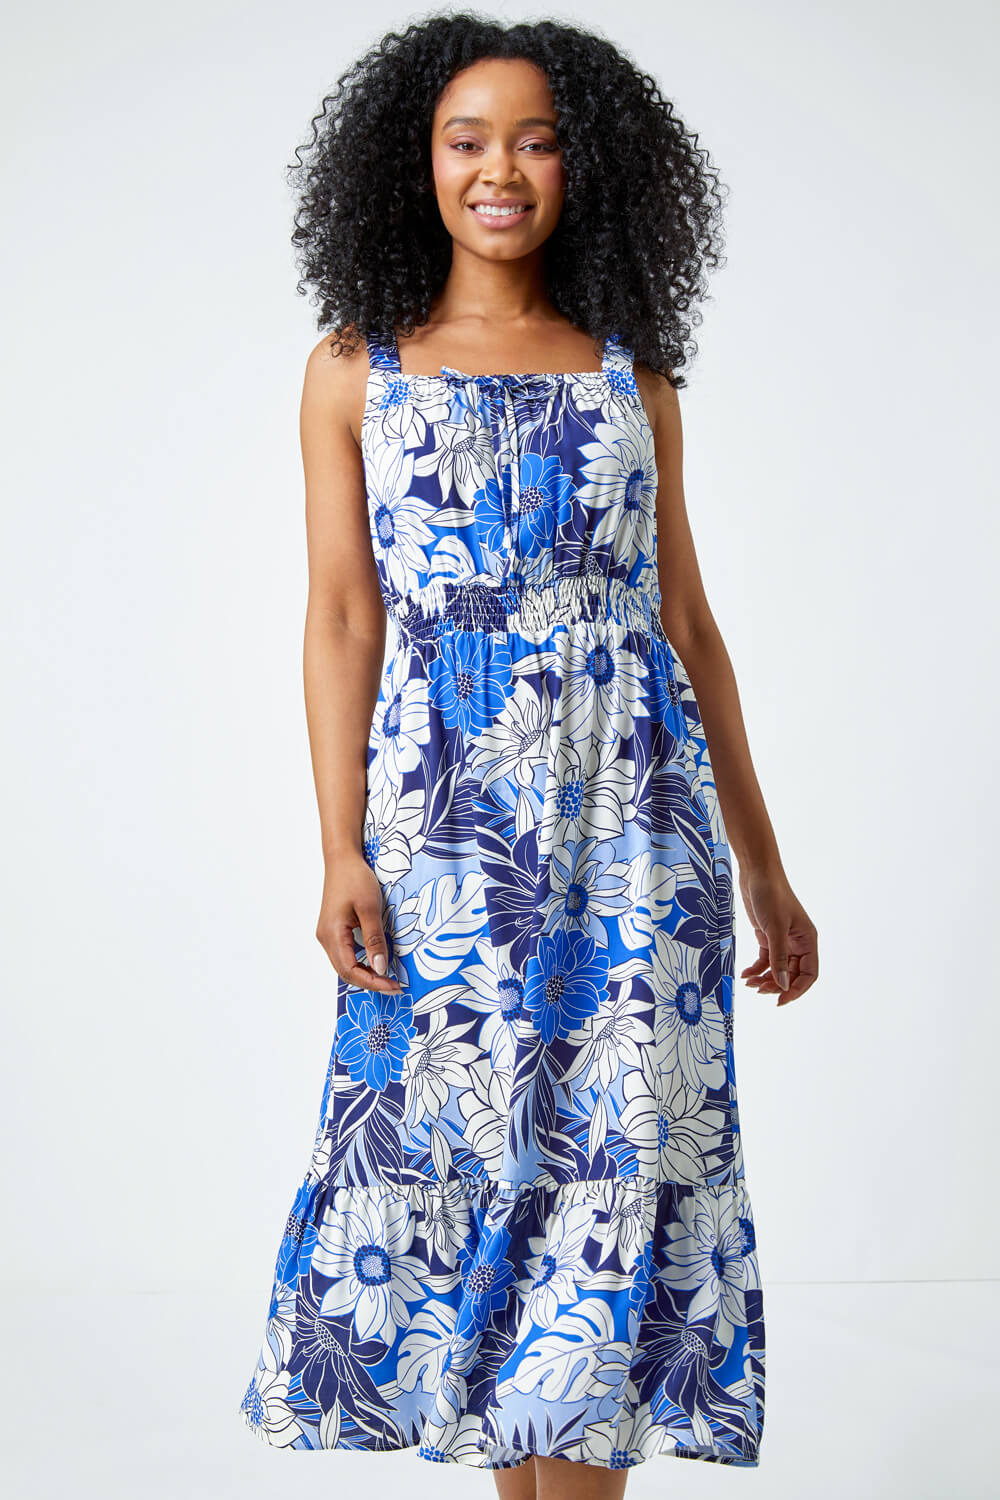 Blue Petite Floral Print Tiered Sundress, Image 4 of 5